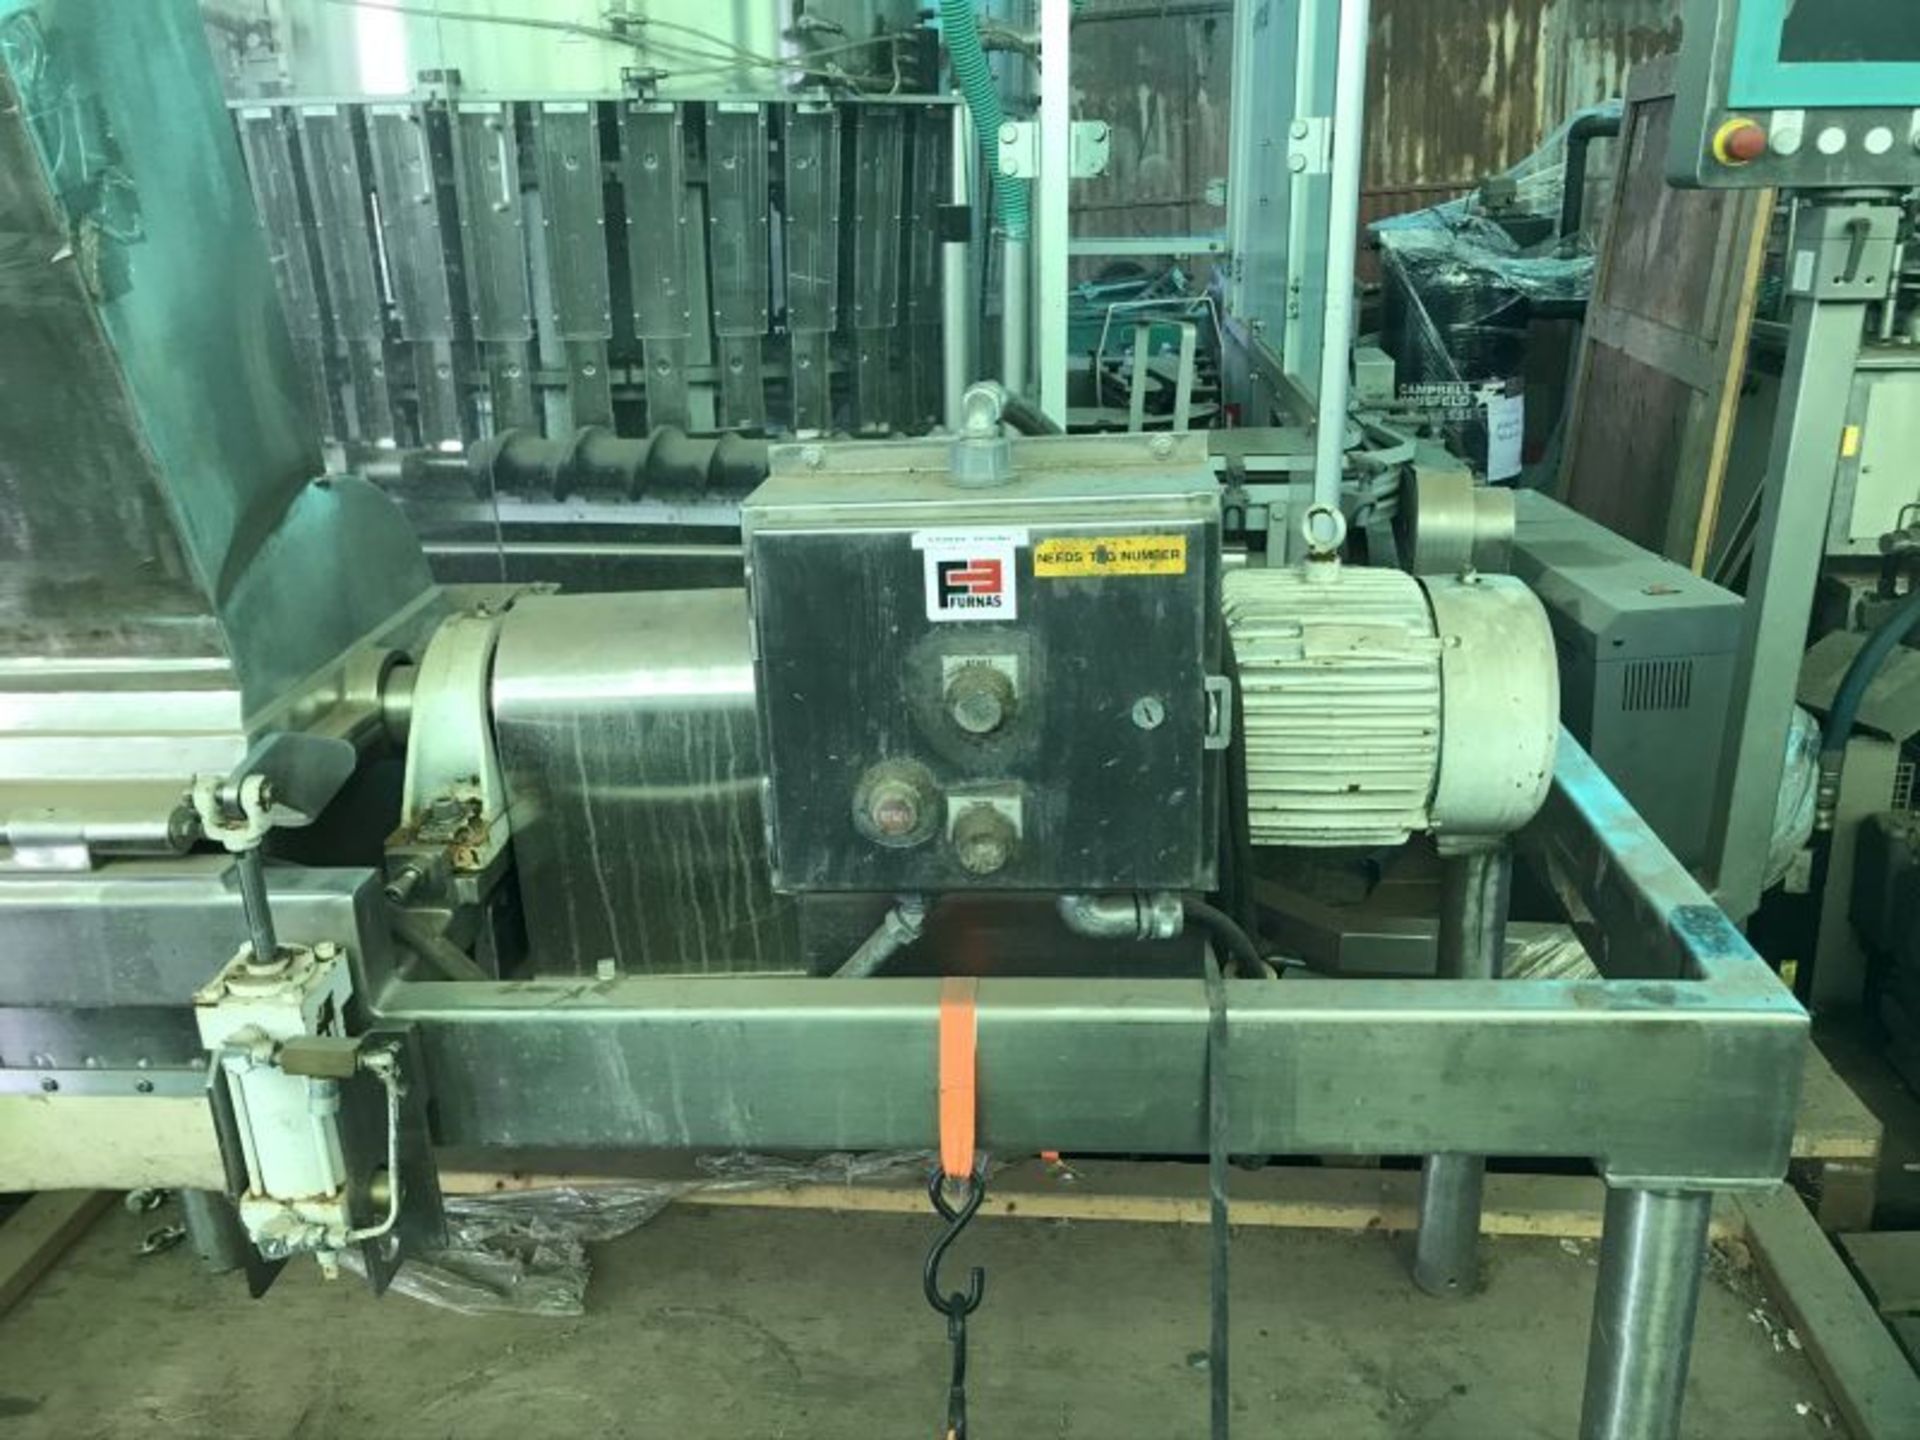 Fitzpatrick Guilioriver Mill. Model 14L X 14D. 5 Hp, 220 Volts, 1730 RPM, 3 Phase, 60 Hz.(As shown - Image 2 of 5